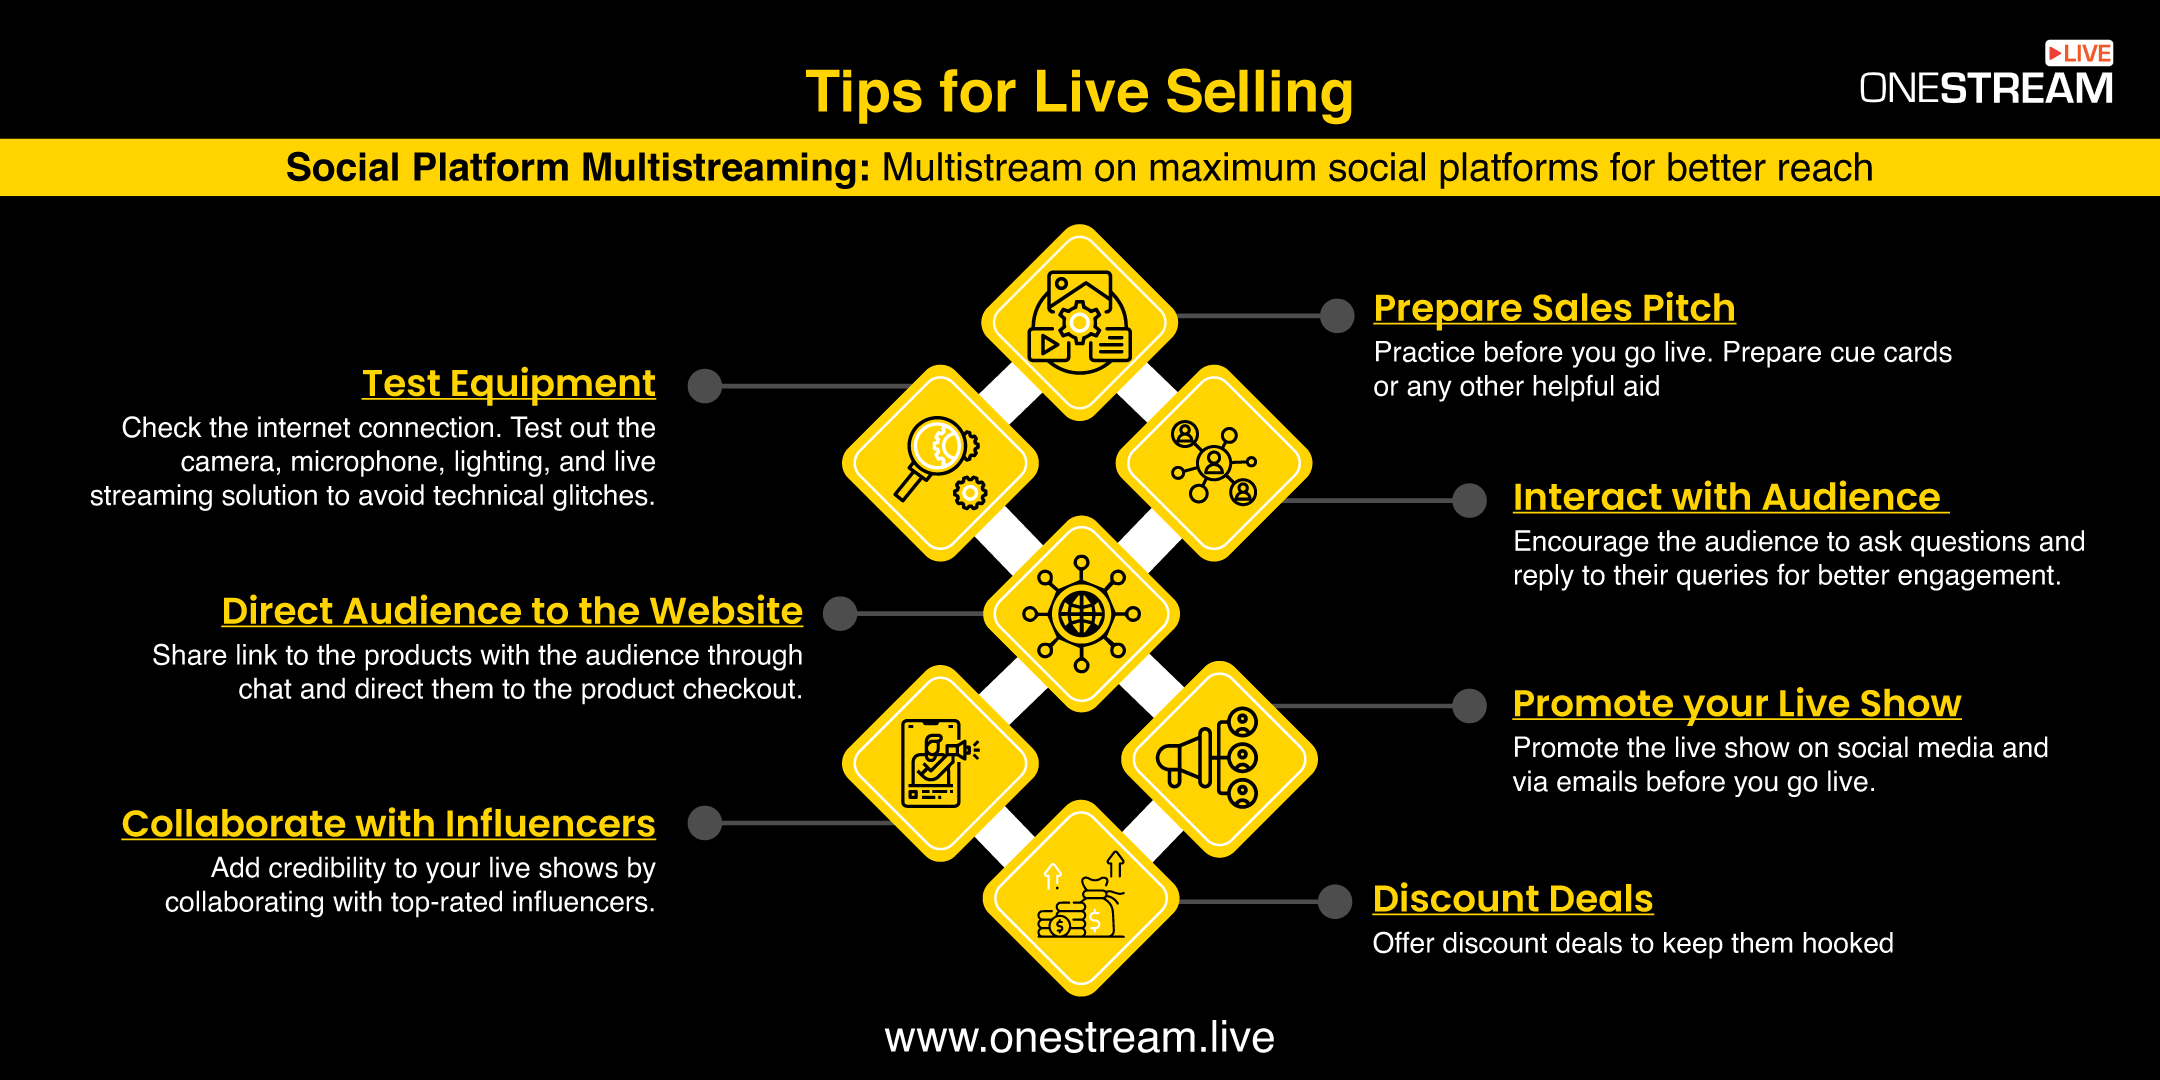 Tips for Live Selling